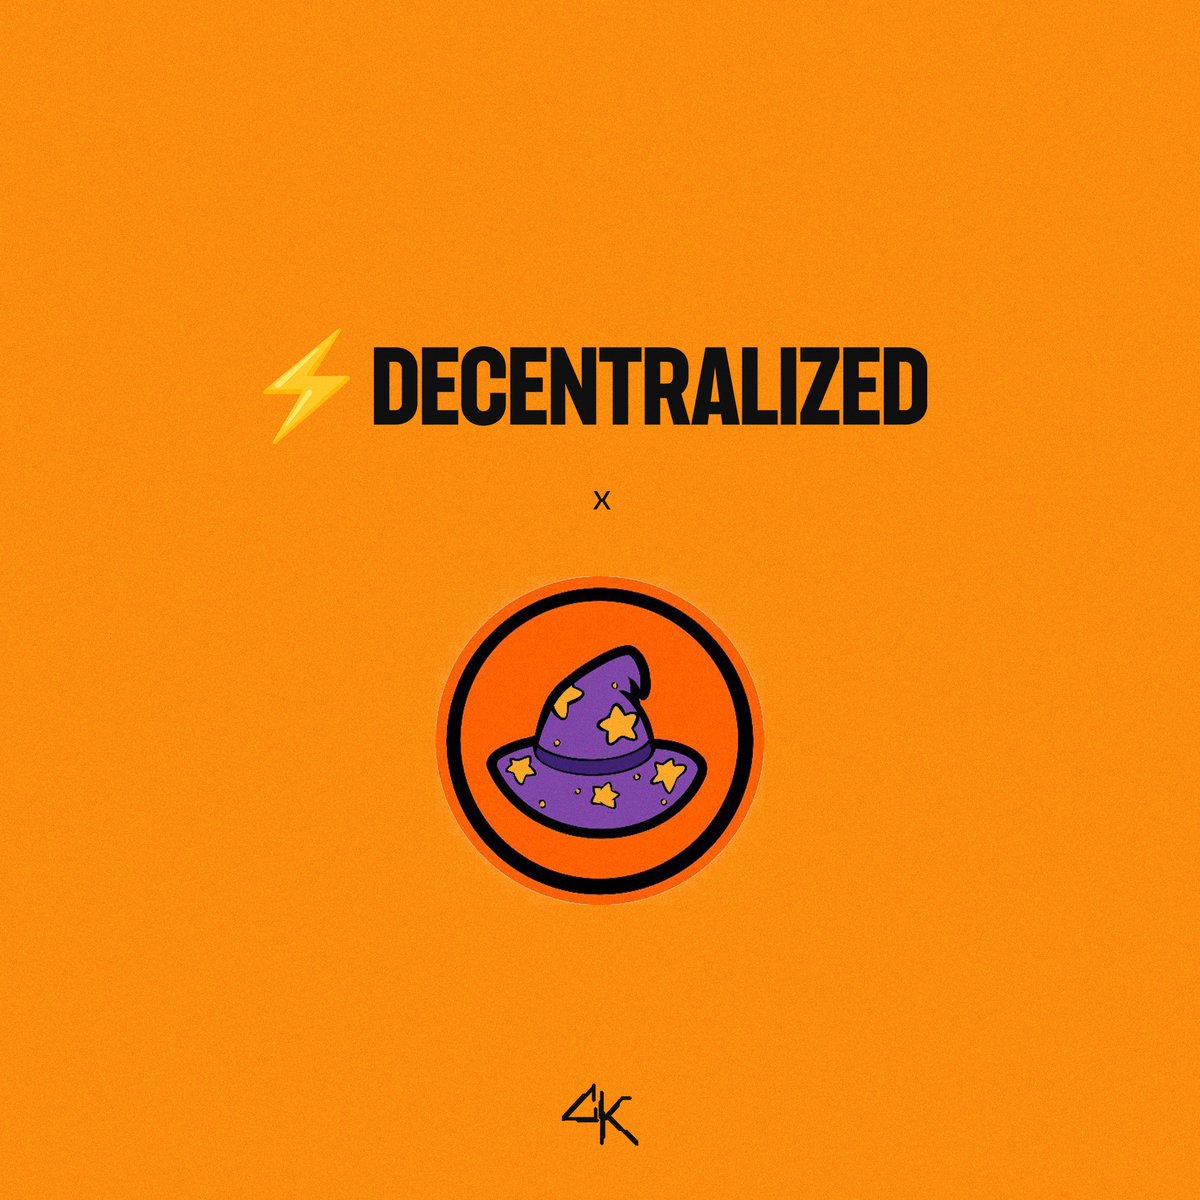 Welcome to ⚡️DECENTRALIZED, @TheWizardsOfOrd.